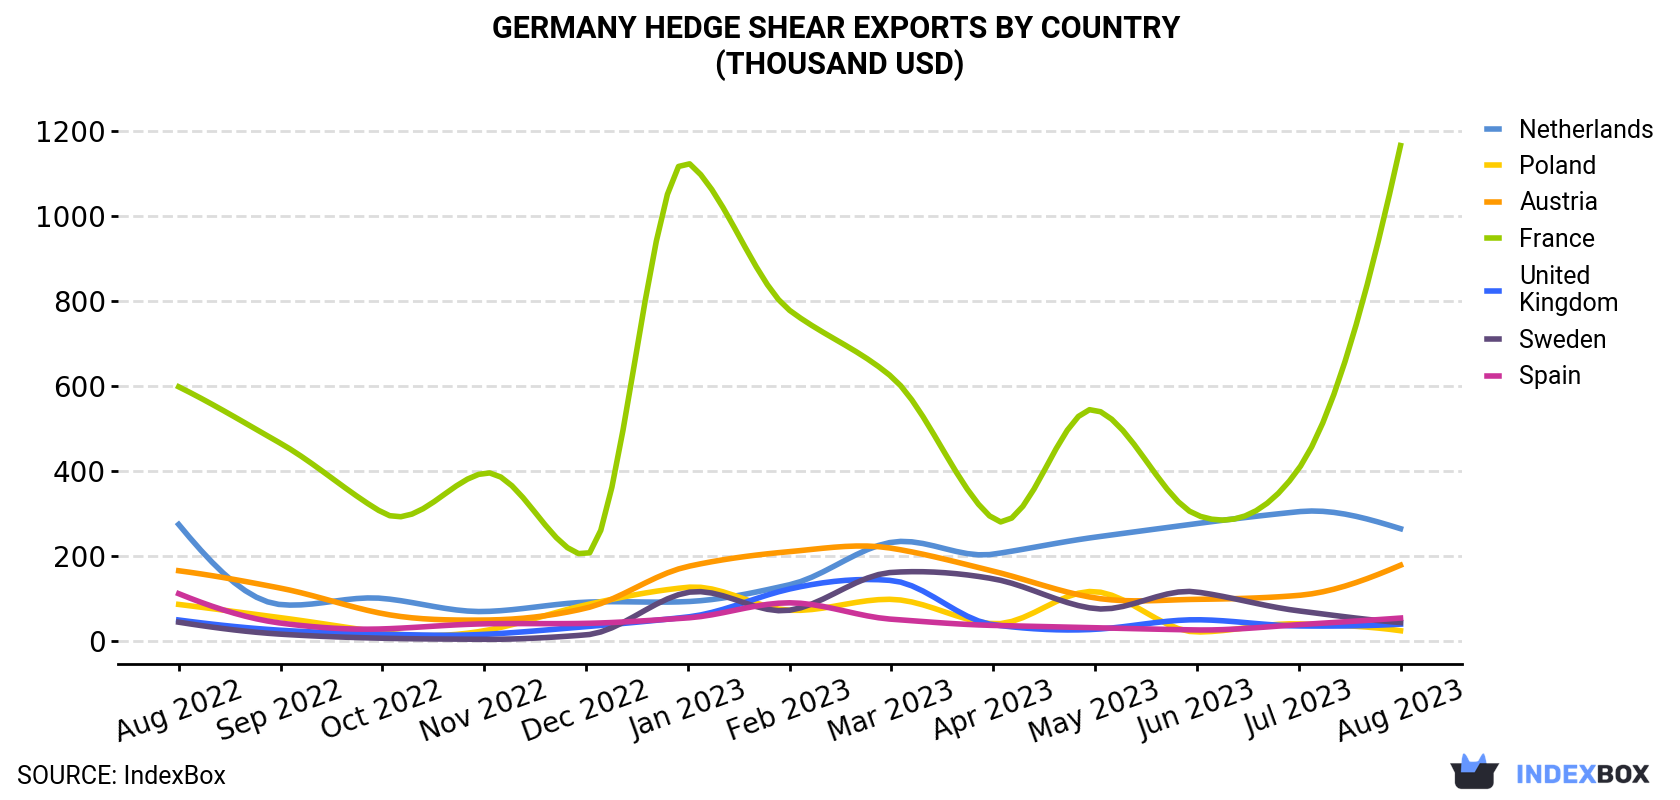 Germany Hedge Shear Exports By Country (Thousand USD)